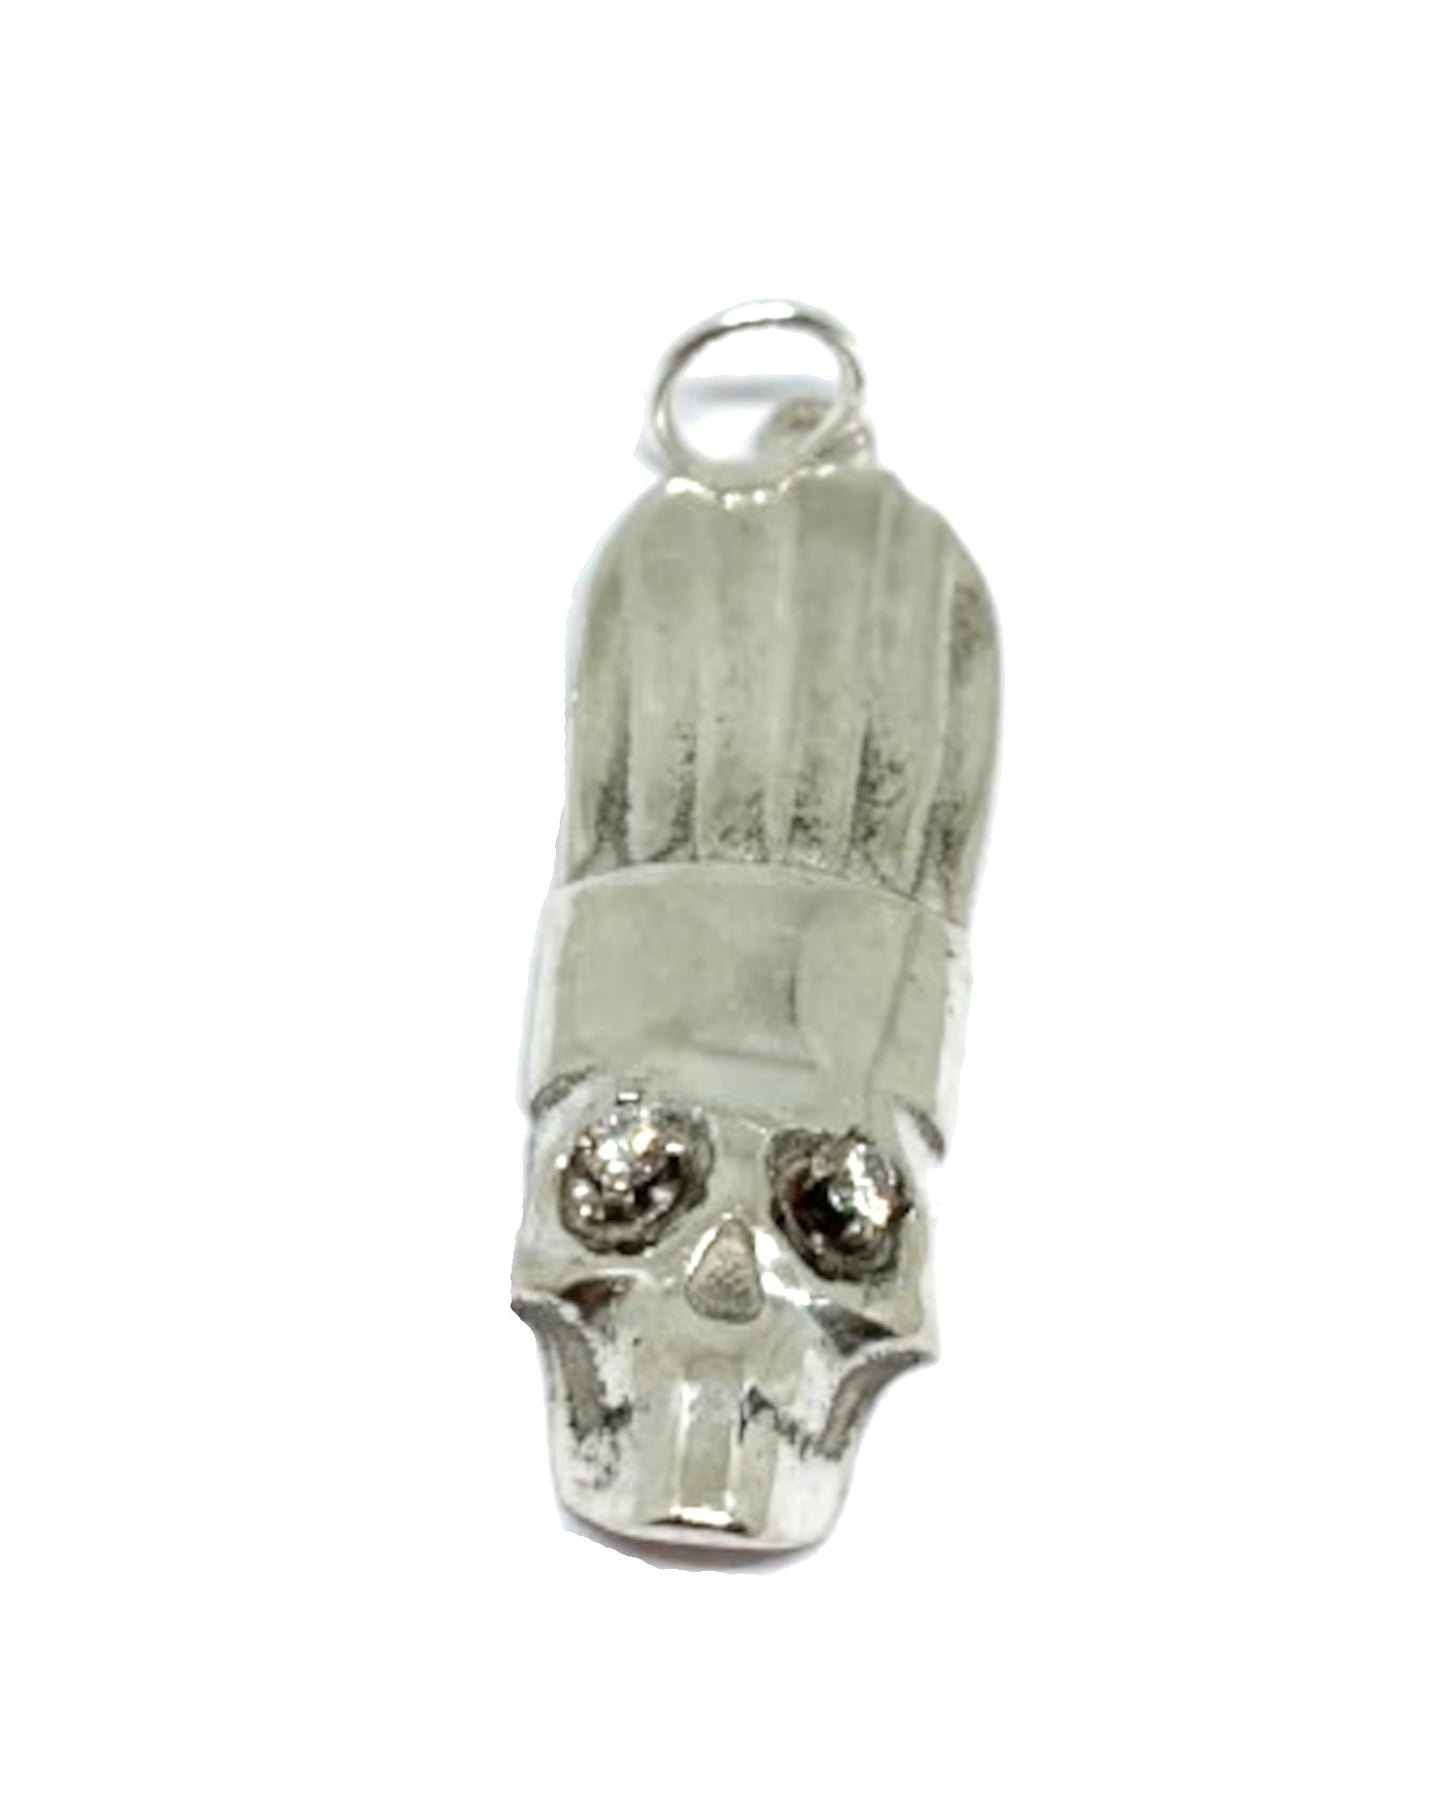 Chef Skull Charm in Sterling Silver with Lab Created Diamond Eyes